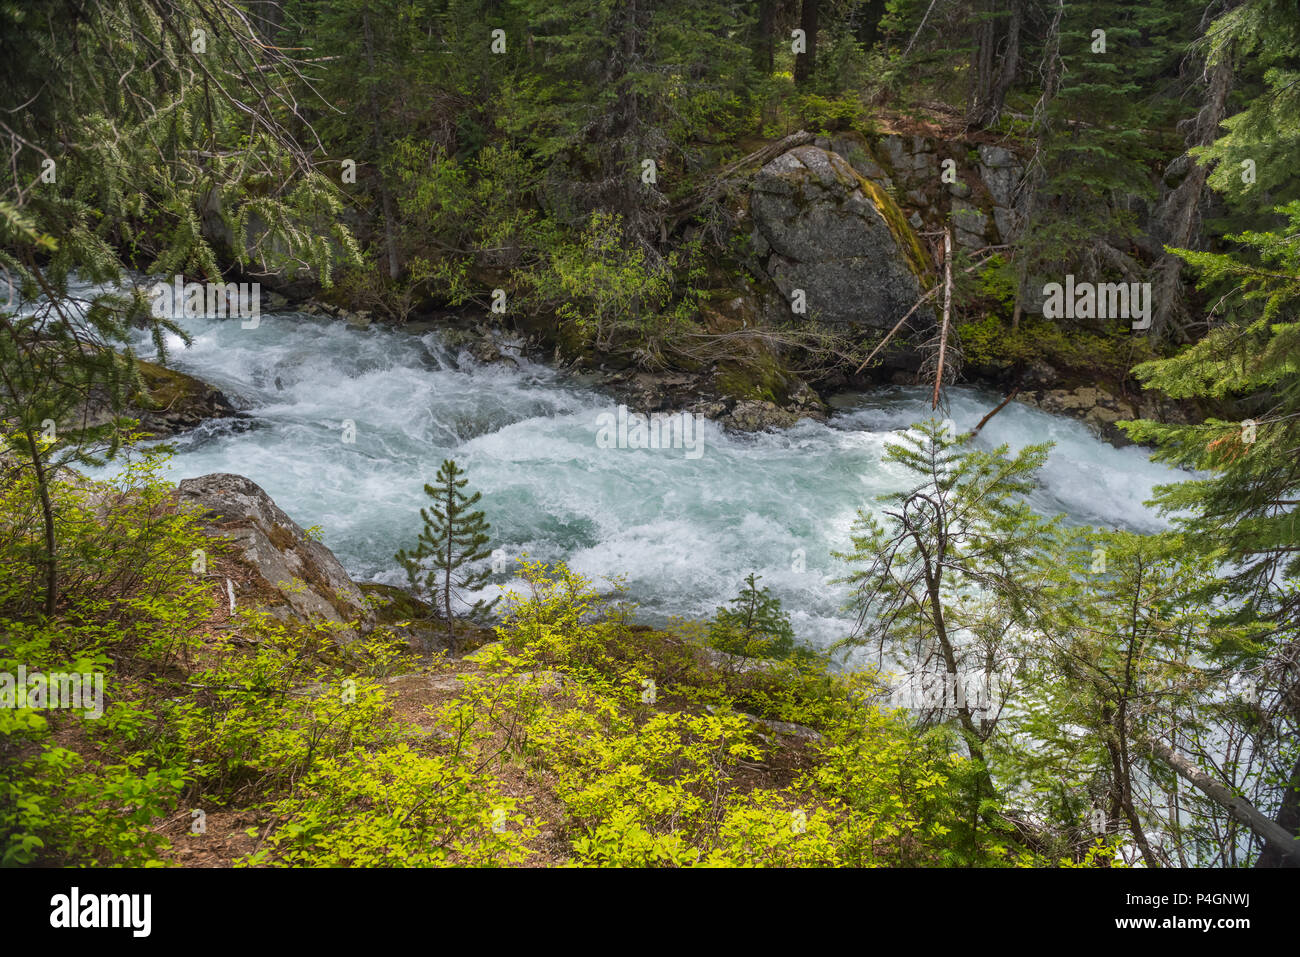 The Wild and Scenic Lostine River in the Wallowa Whitman National Forest of northeast Oregon Stock Photo